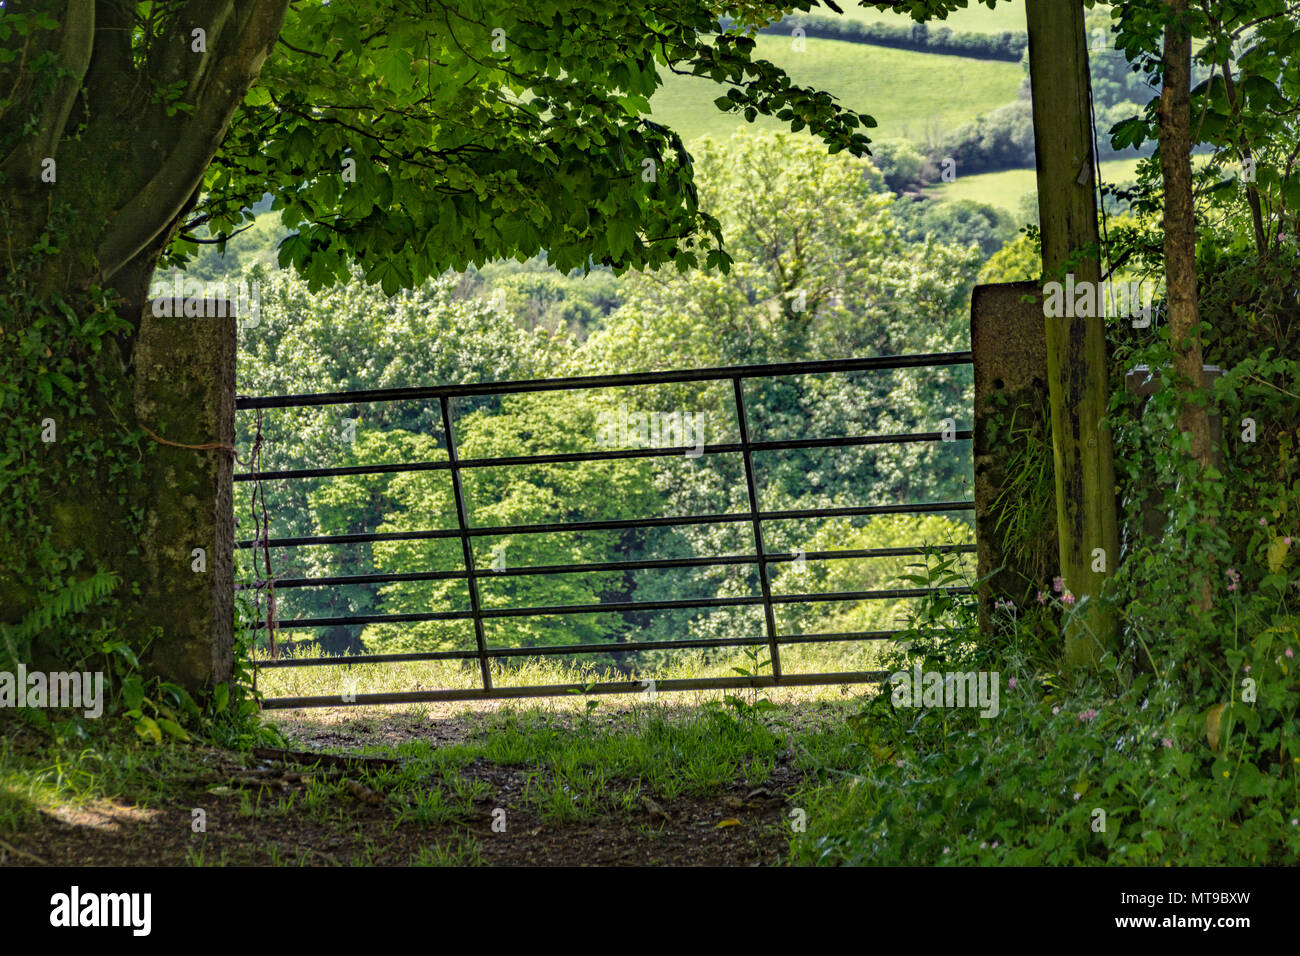 Closed farm / field gate silhouetted against sunlit countryside beyond. For British farming, farm to fork and field to plate metaphors. Stock Photo